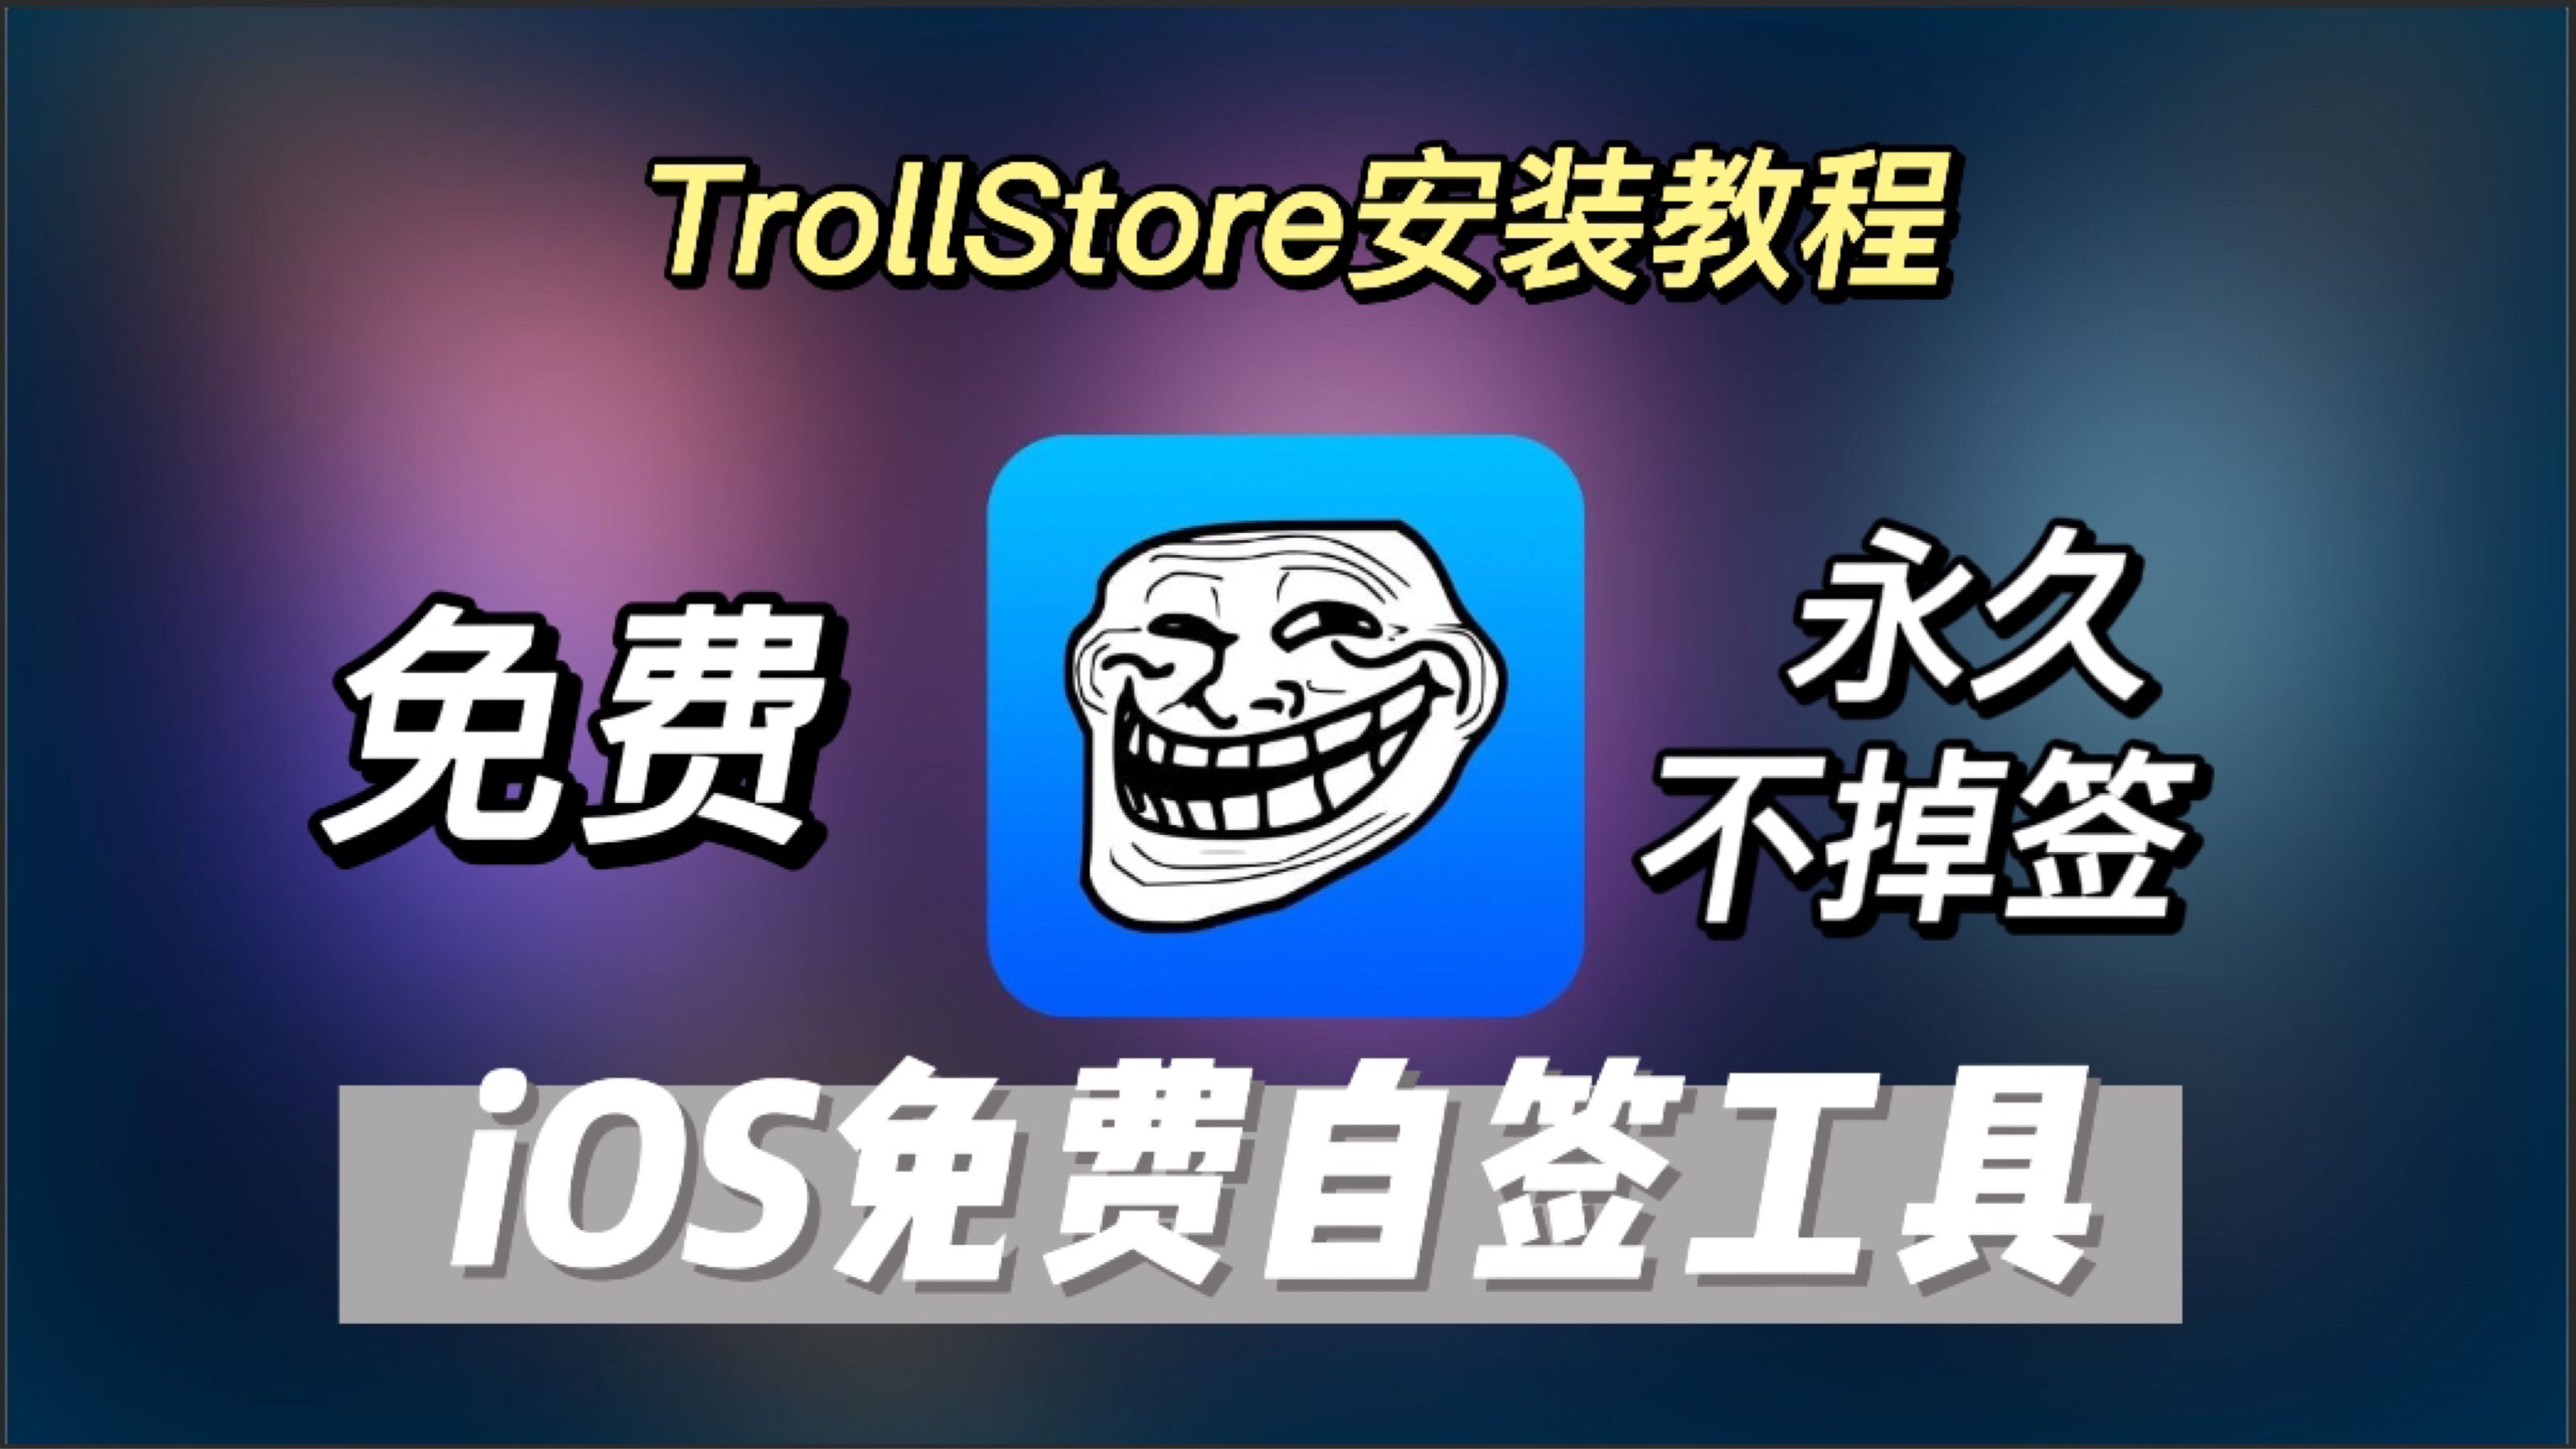 How to remove TrollStore from your iPhone or iPad